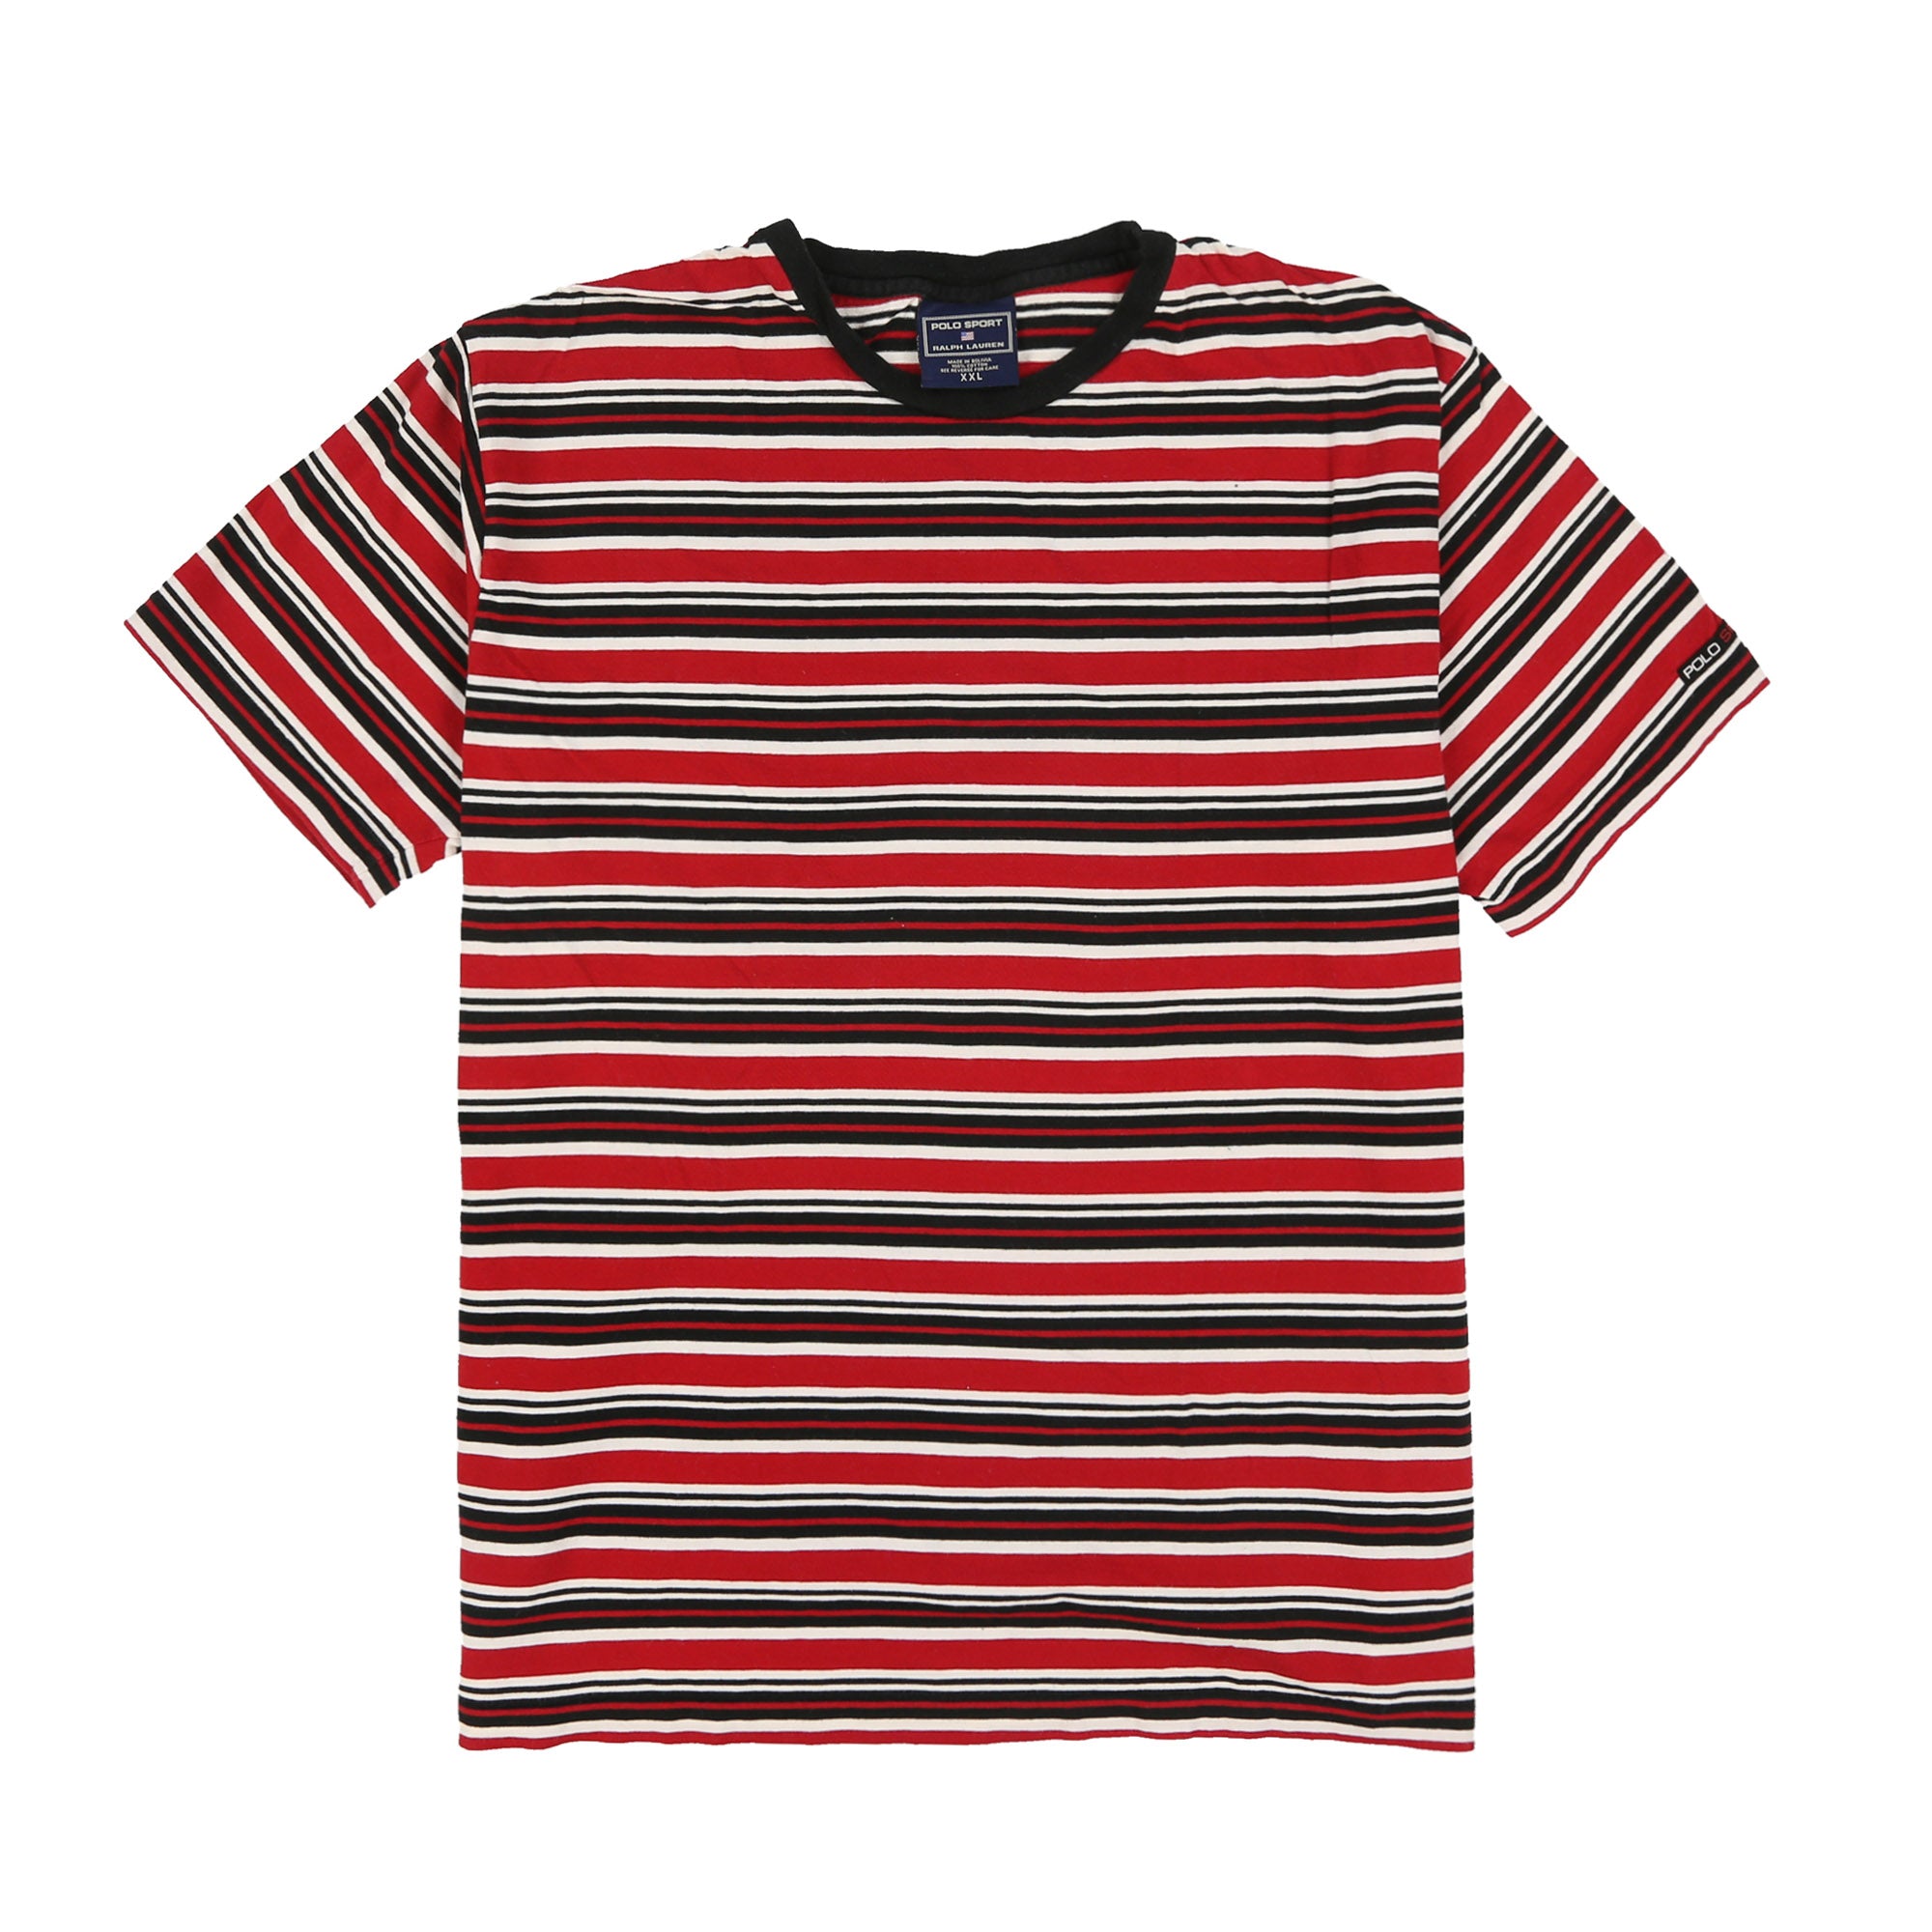 POLO SPORT STRIPED RINGER TEE // BLUE RED NATURAL